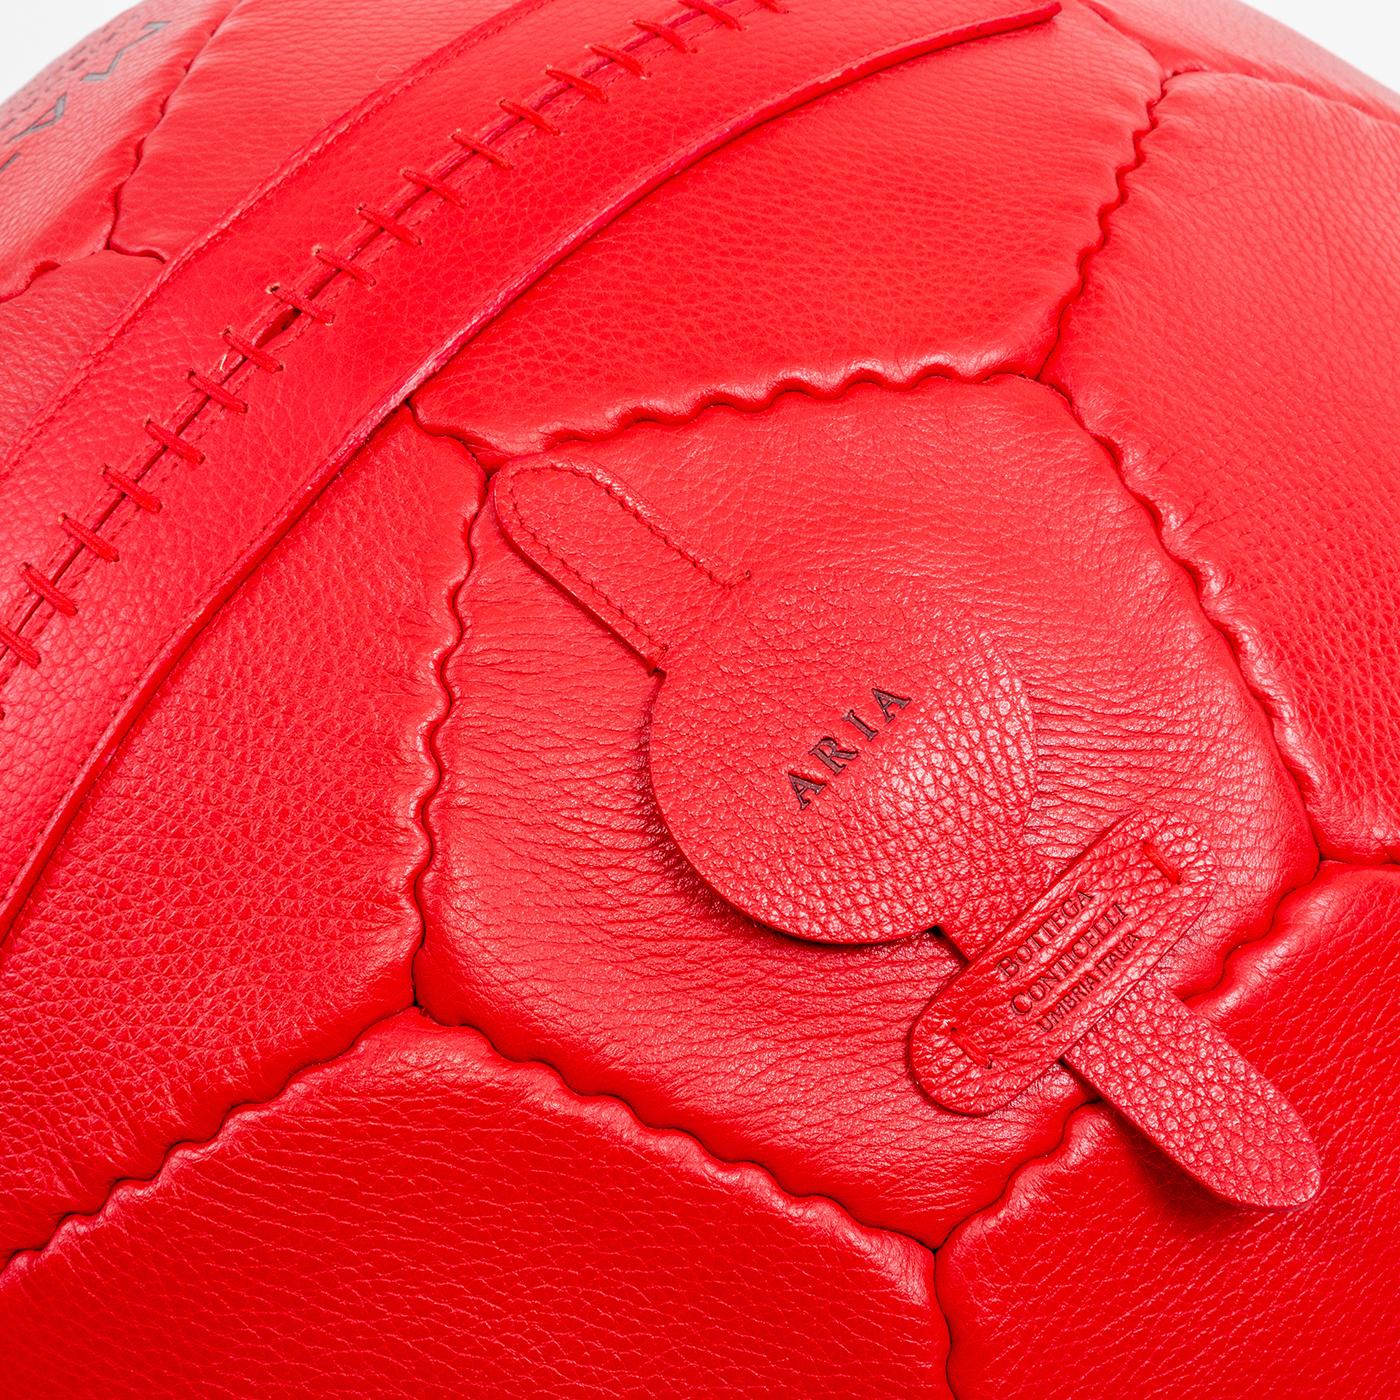 Transform any environment into a space filled with fun and interactivity. This large pouf in the shape of a soccer ball can be moved about a room by rolling it like a ball across a sporting pitch. It features hand sewn seams, an ergonomically